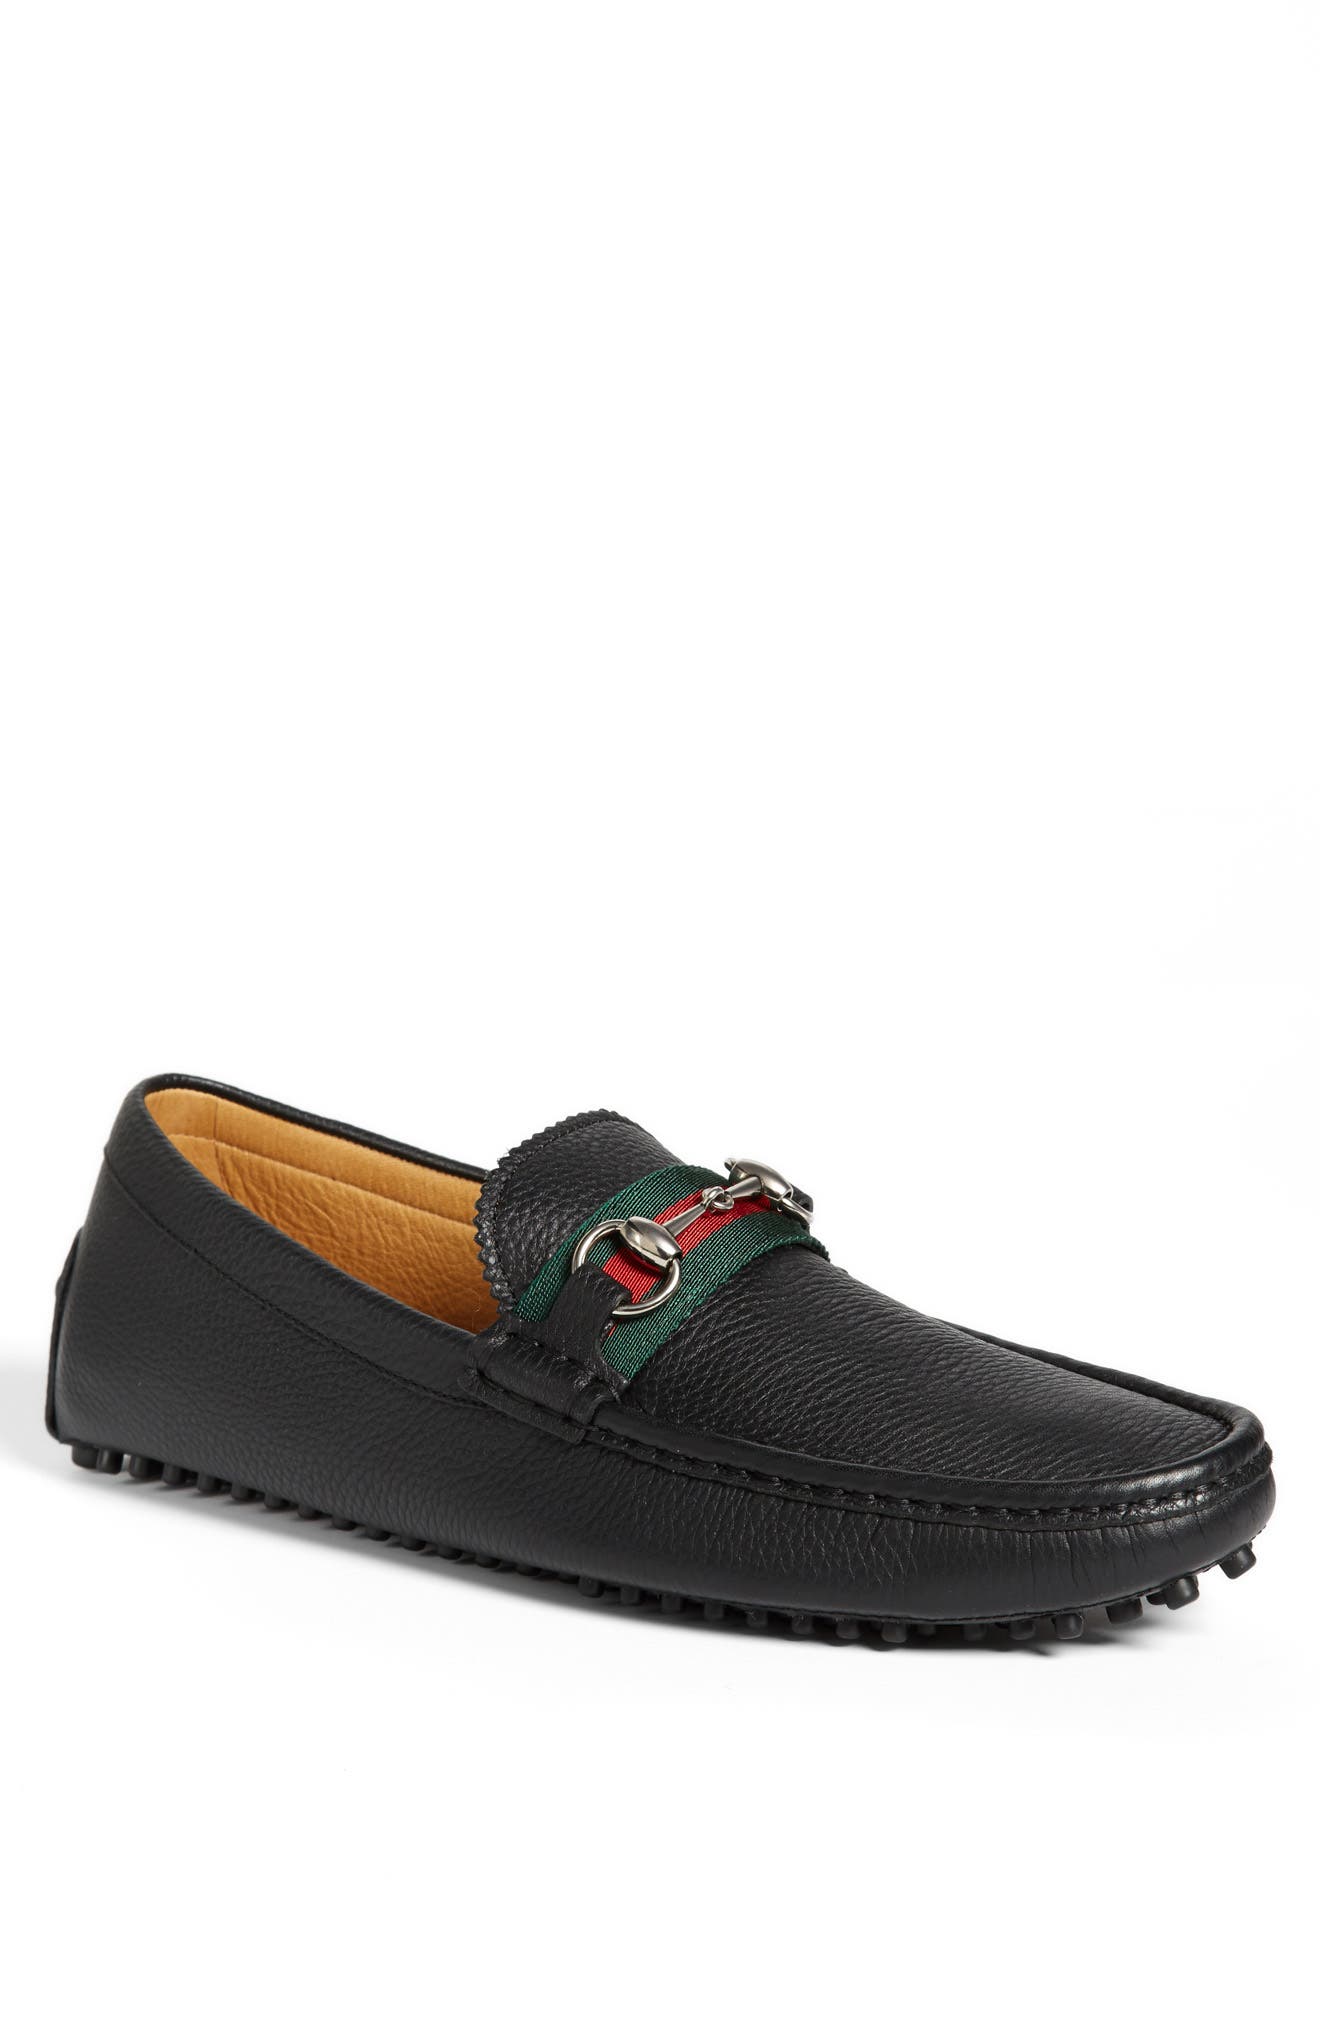 gucci driving moccasins